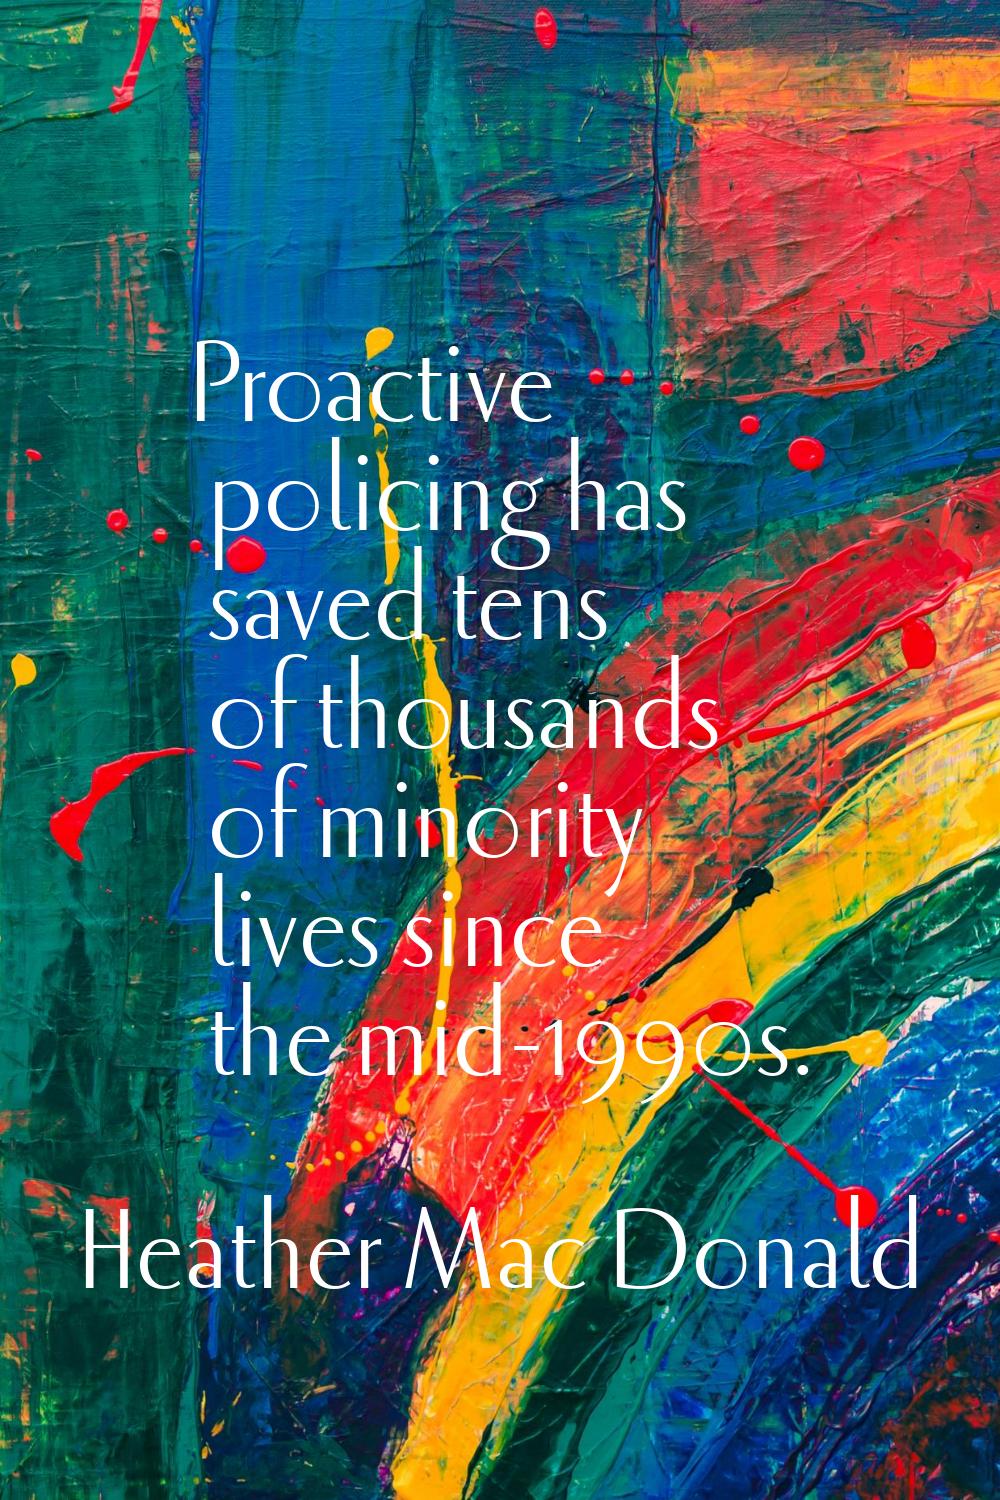 Proactive policing has saved tens of thousands of minority lives since the mid-1990s.